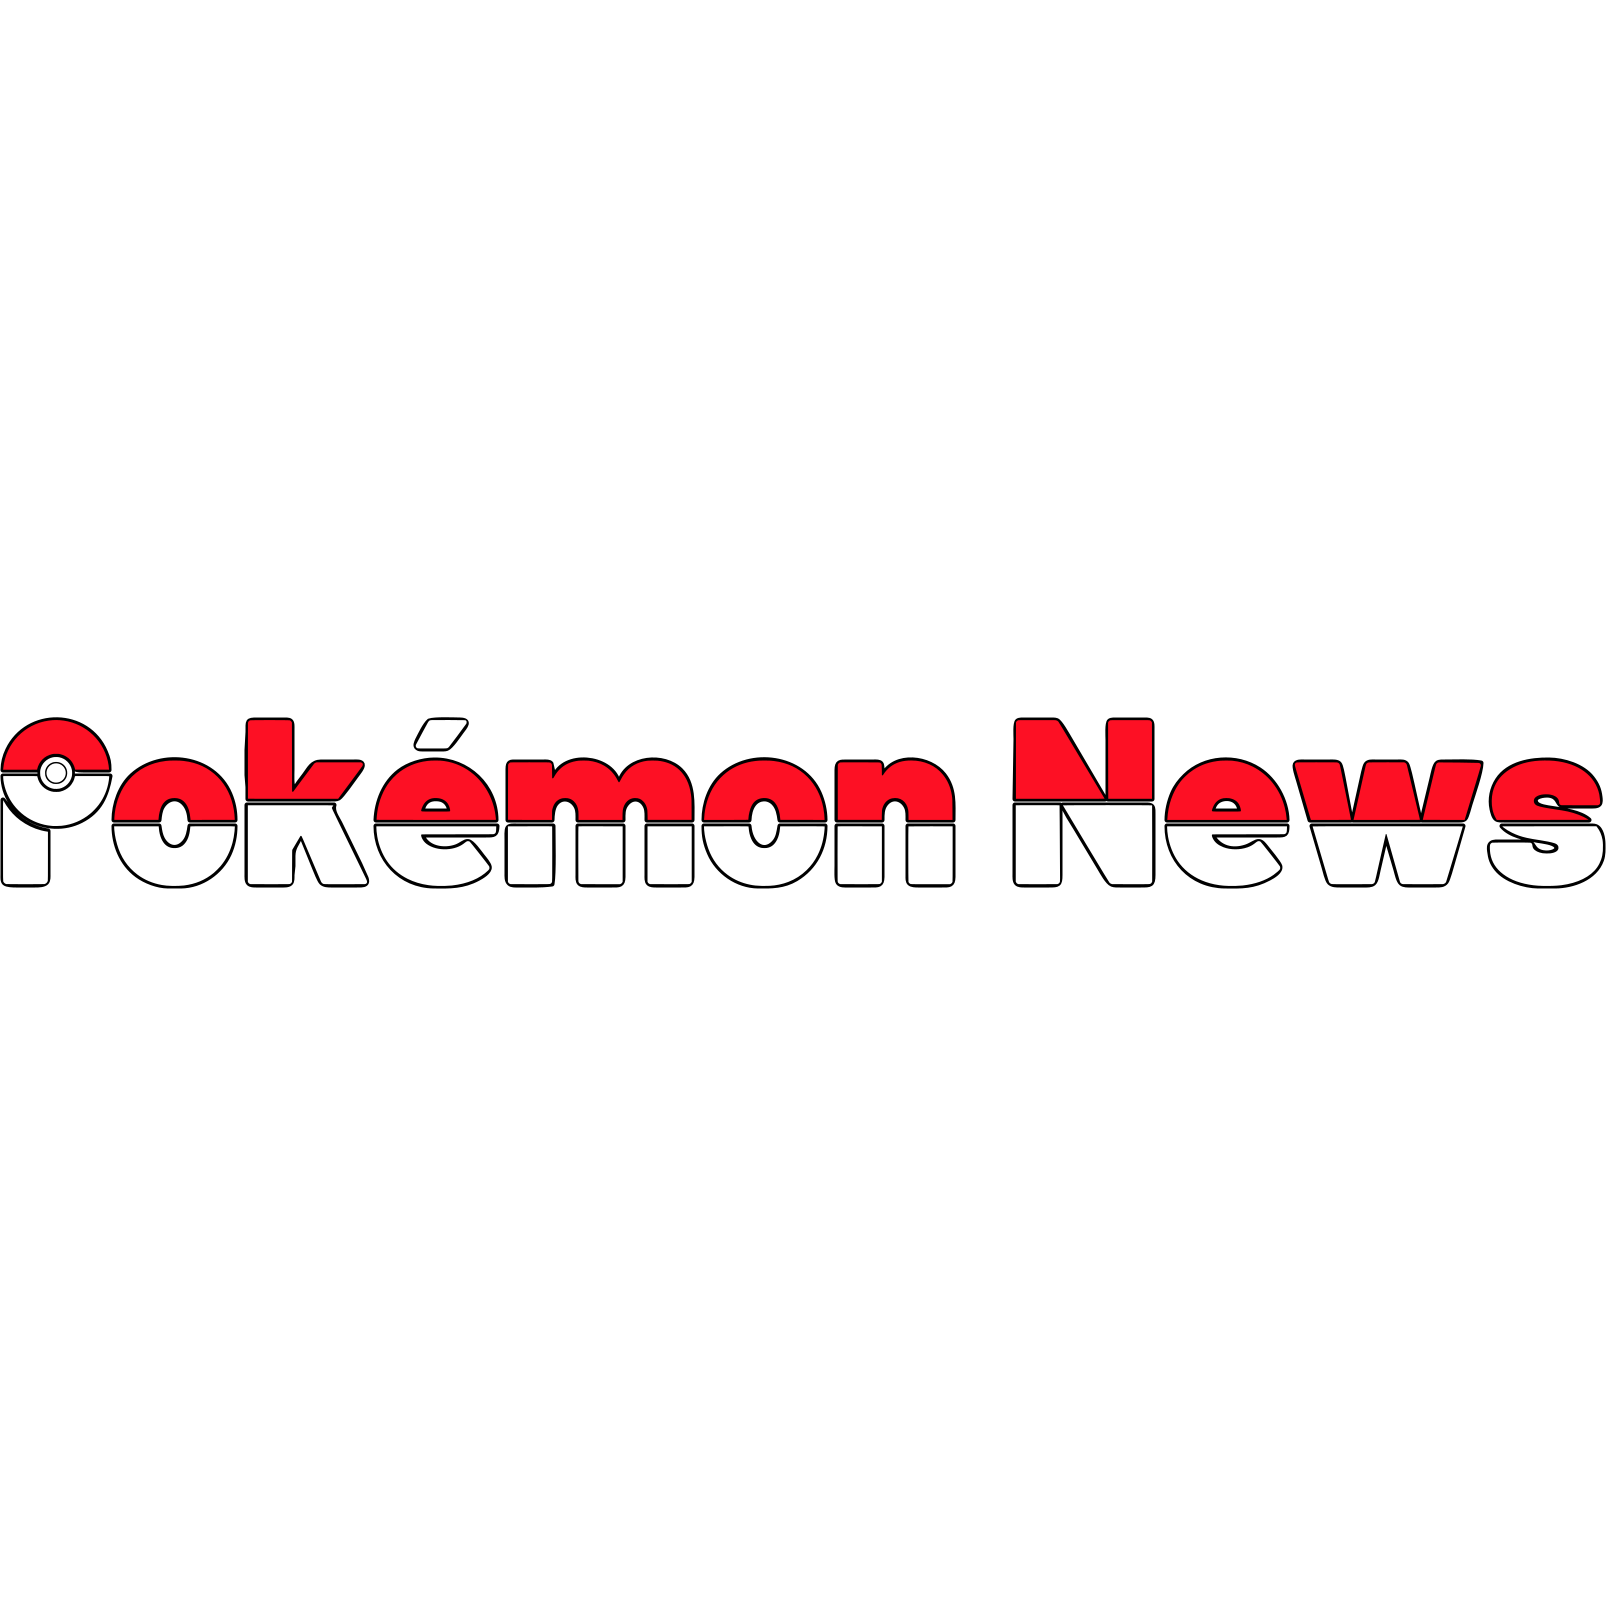 The long version of the logo I designed for an admittedly out of use Facebook page that I'm the admin for, Pokémon News.  The P is a Poké Ball.'.